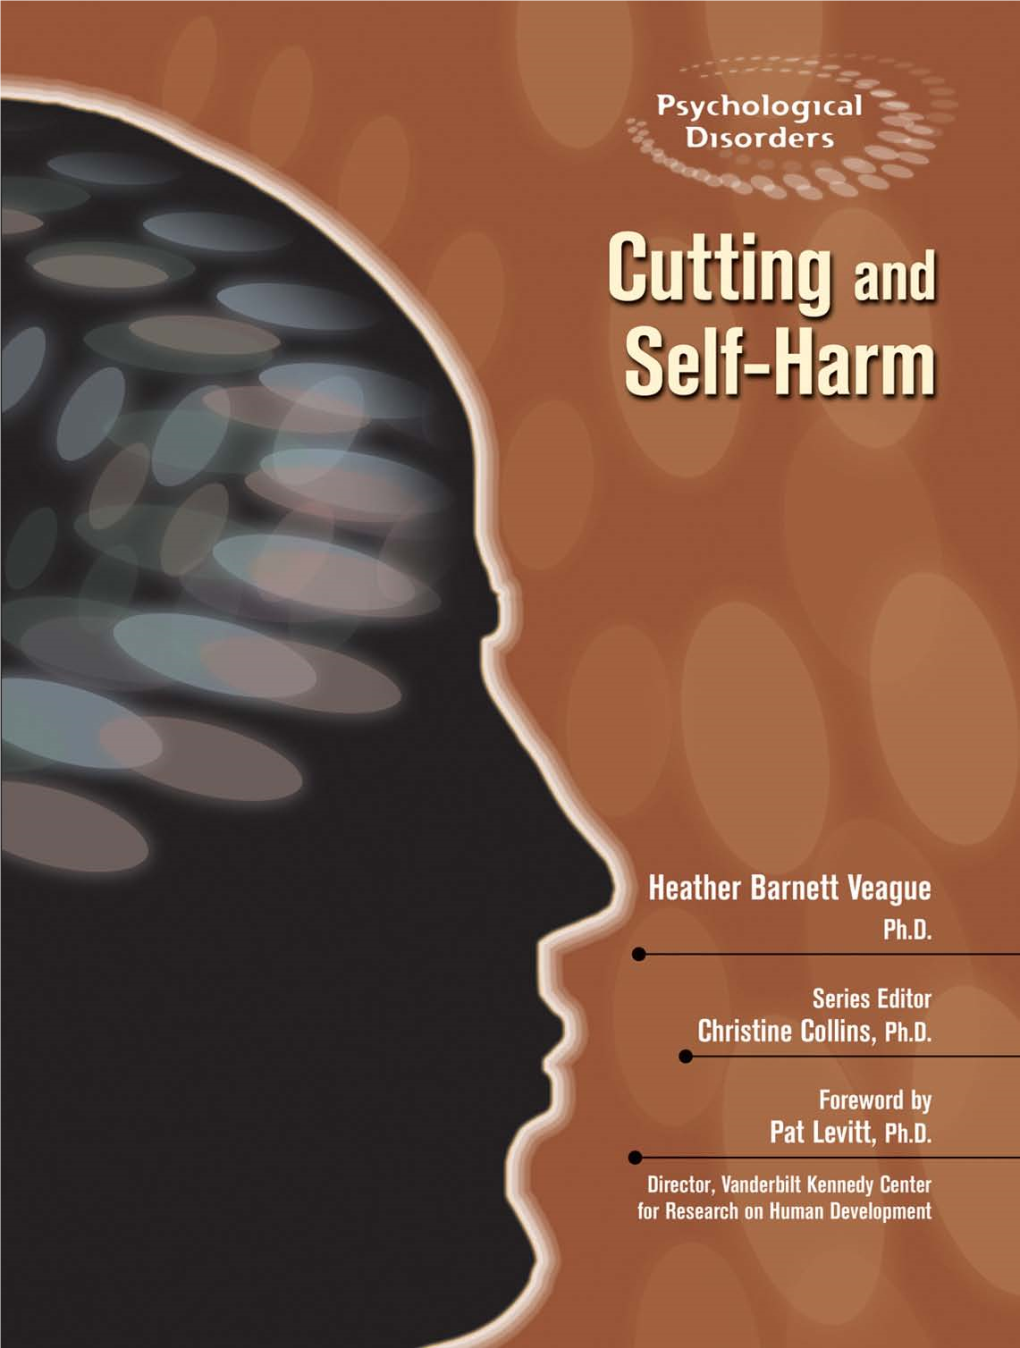 What Is Self-Harm?